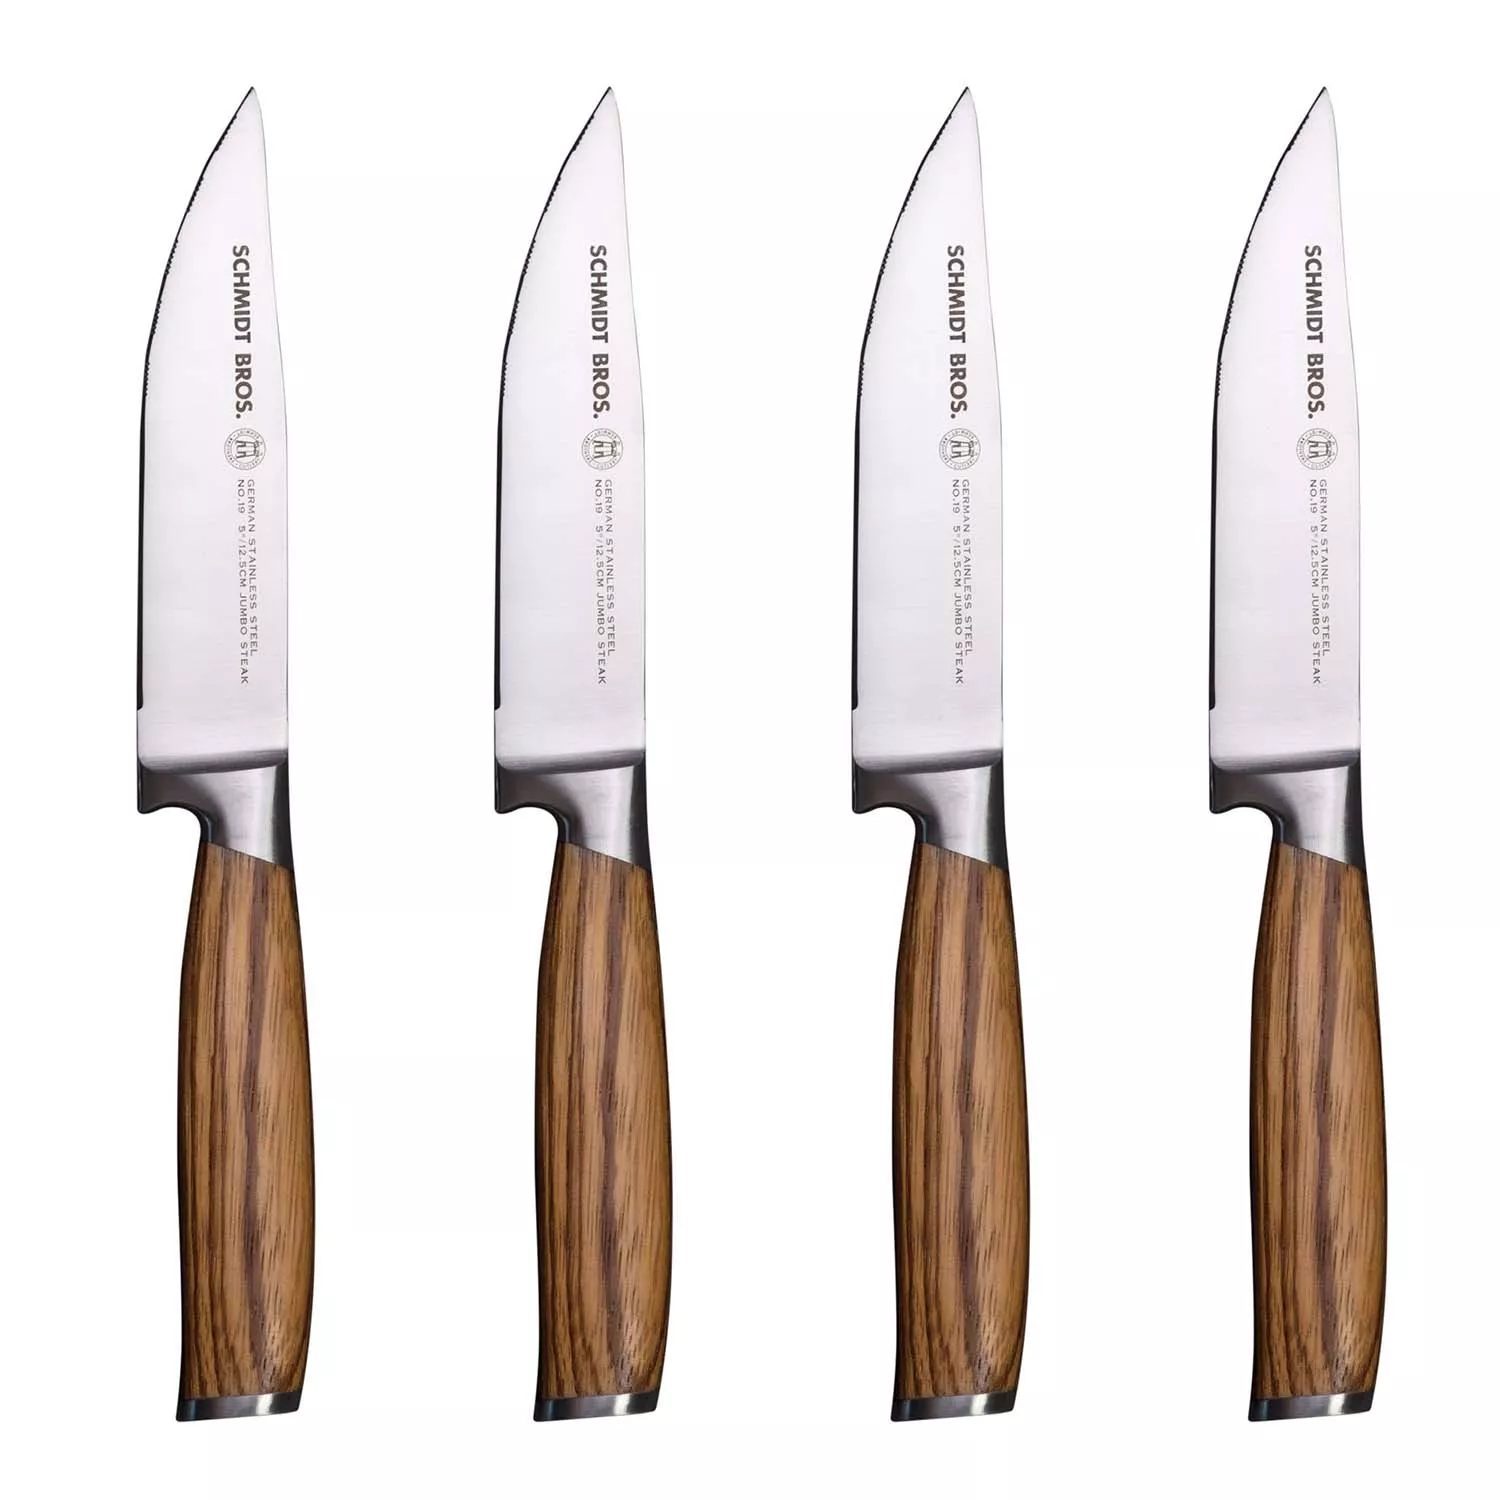 Choice 5 Jumbo Stainless Steel Steak Knife with Wood Handle - 12/Case